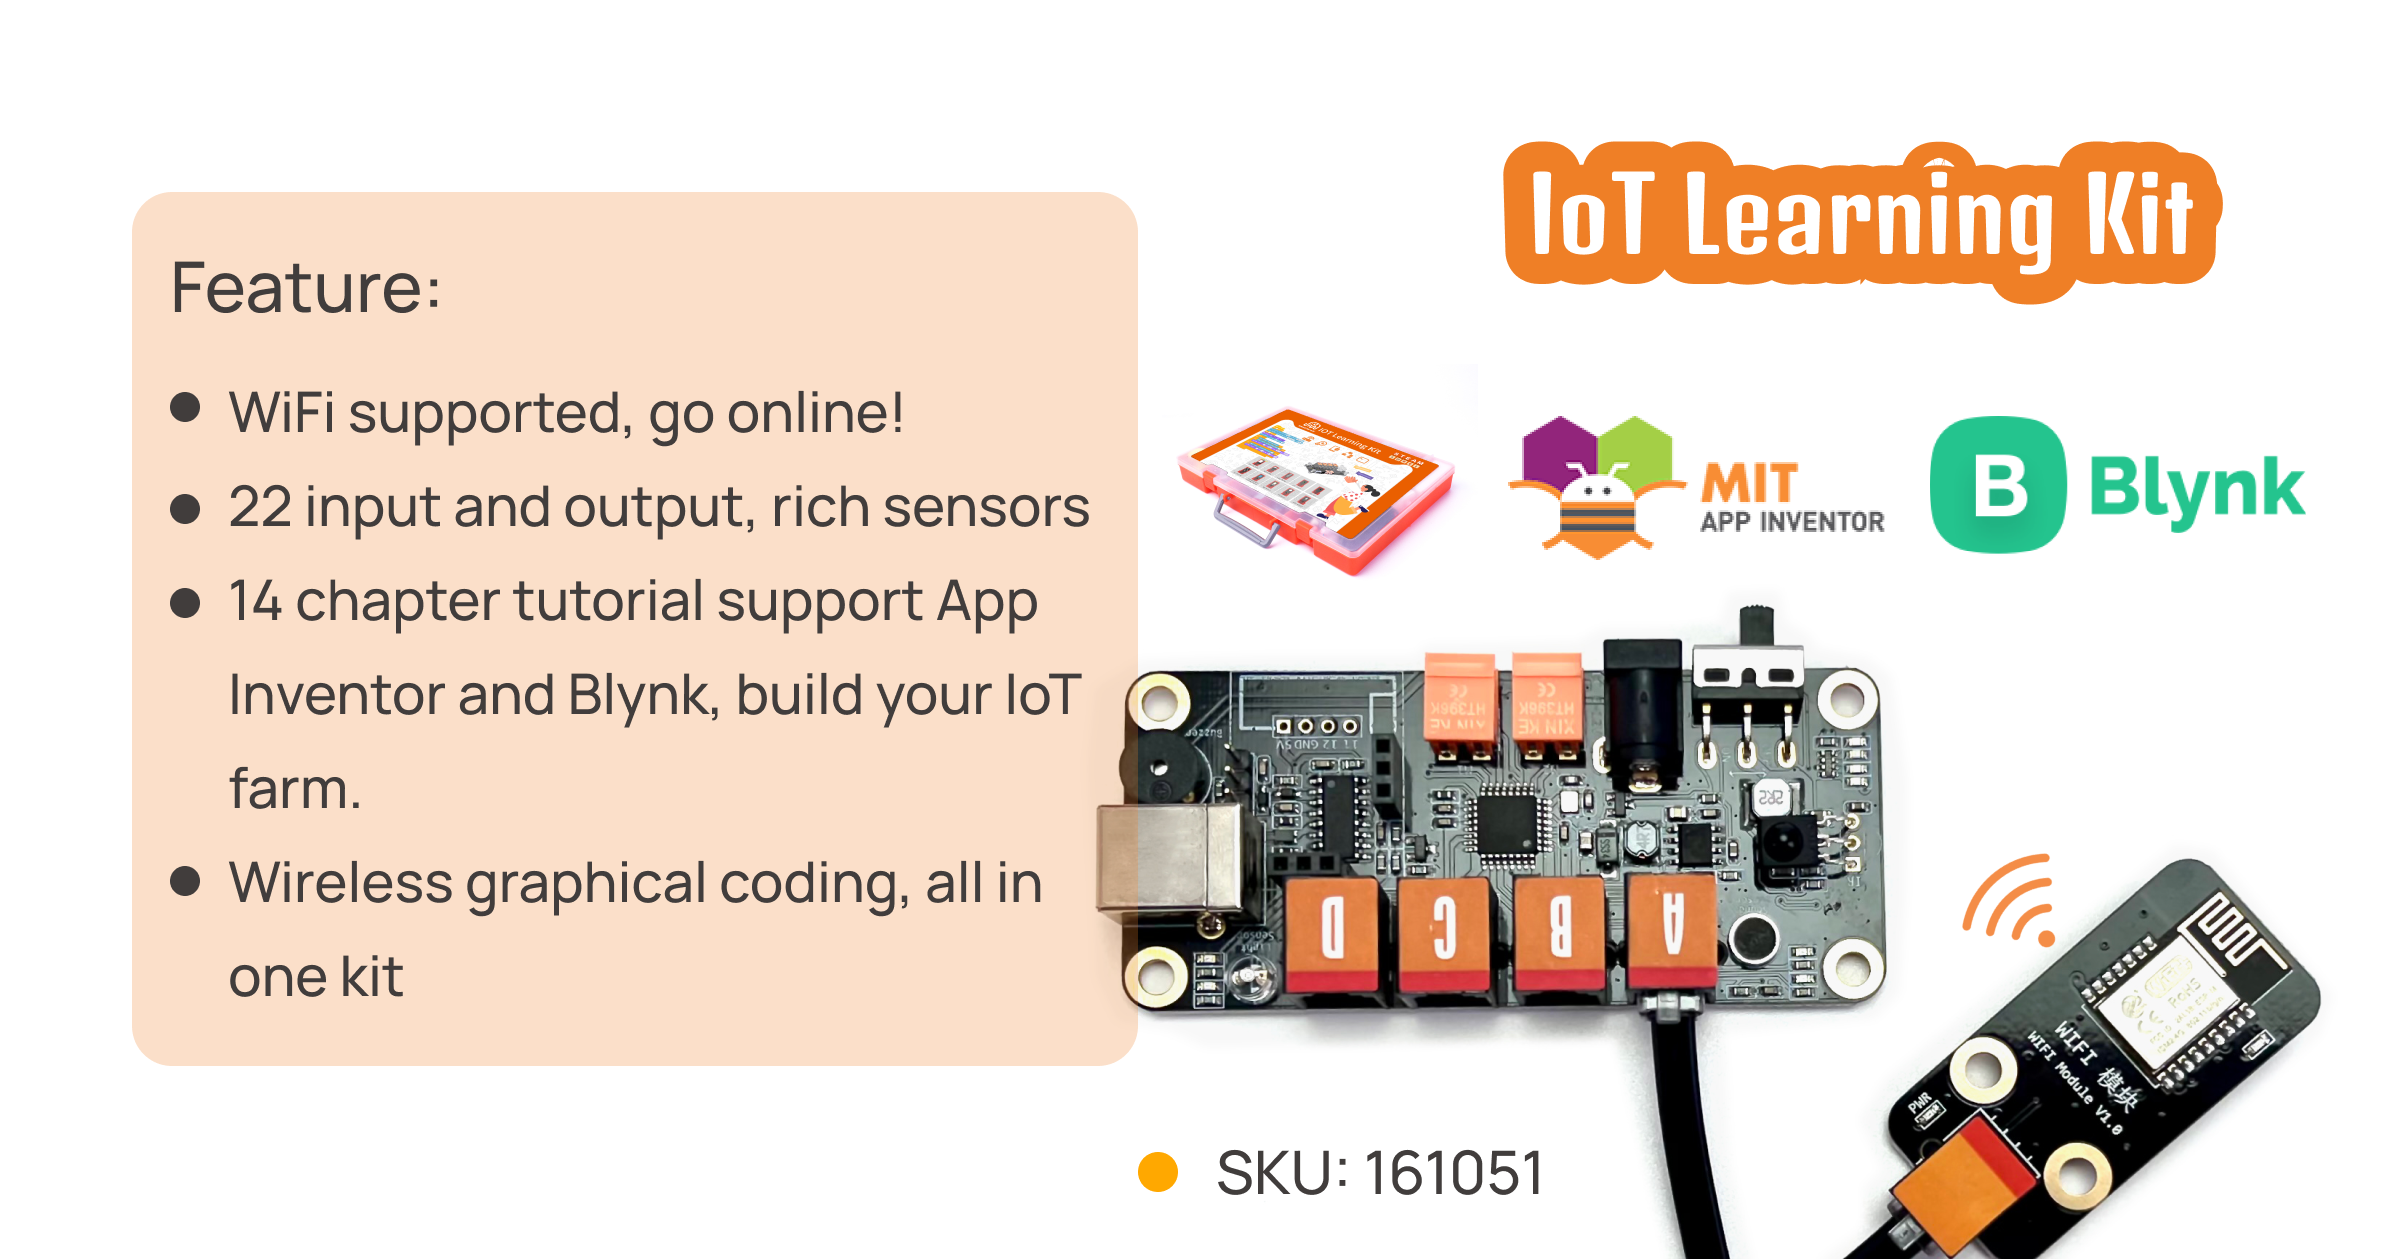 Unleash Your Creativity with Our IoT Learning Kit - Build Smart Projects Today! 